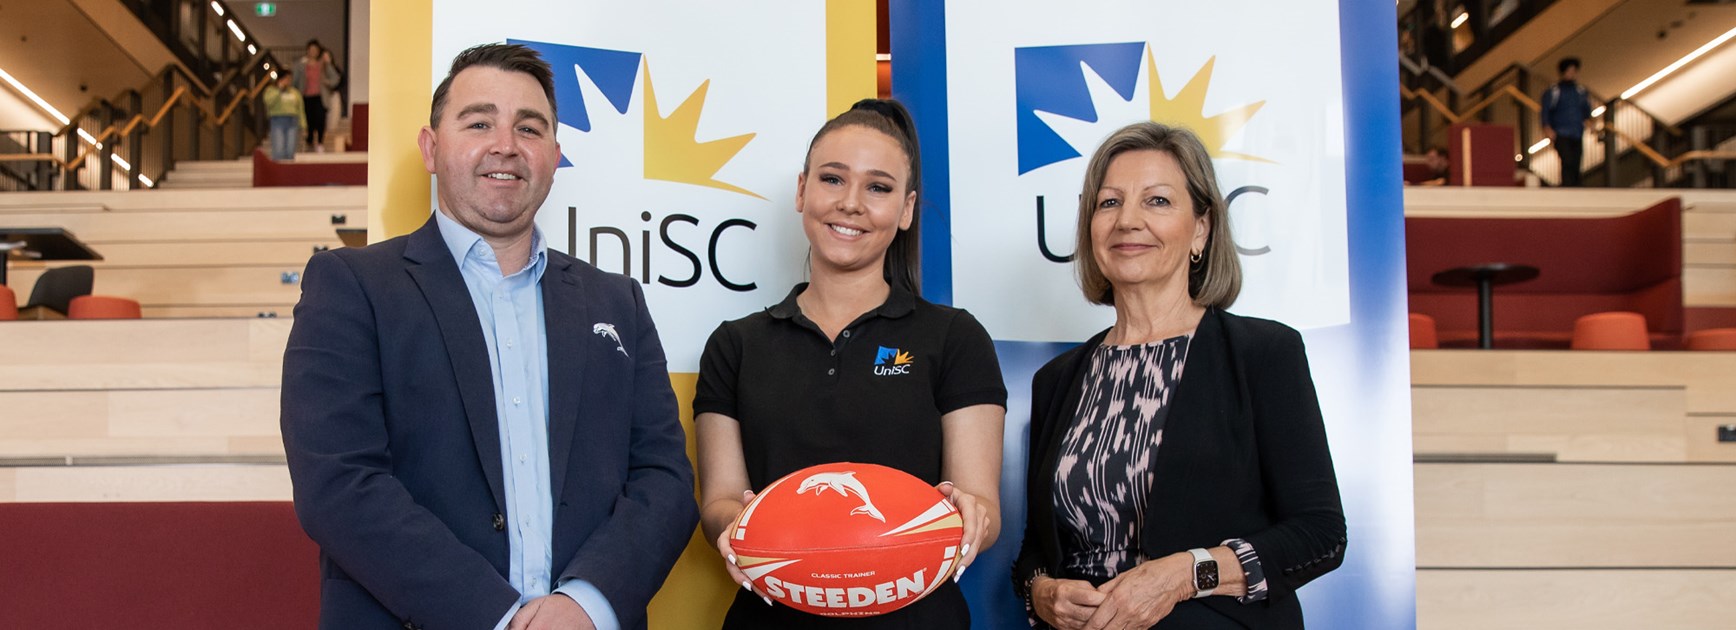 UniSC and Dolphins back talents of Moreton Bay community